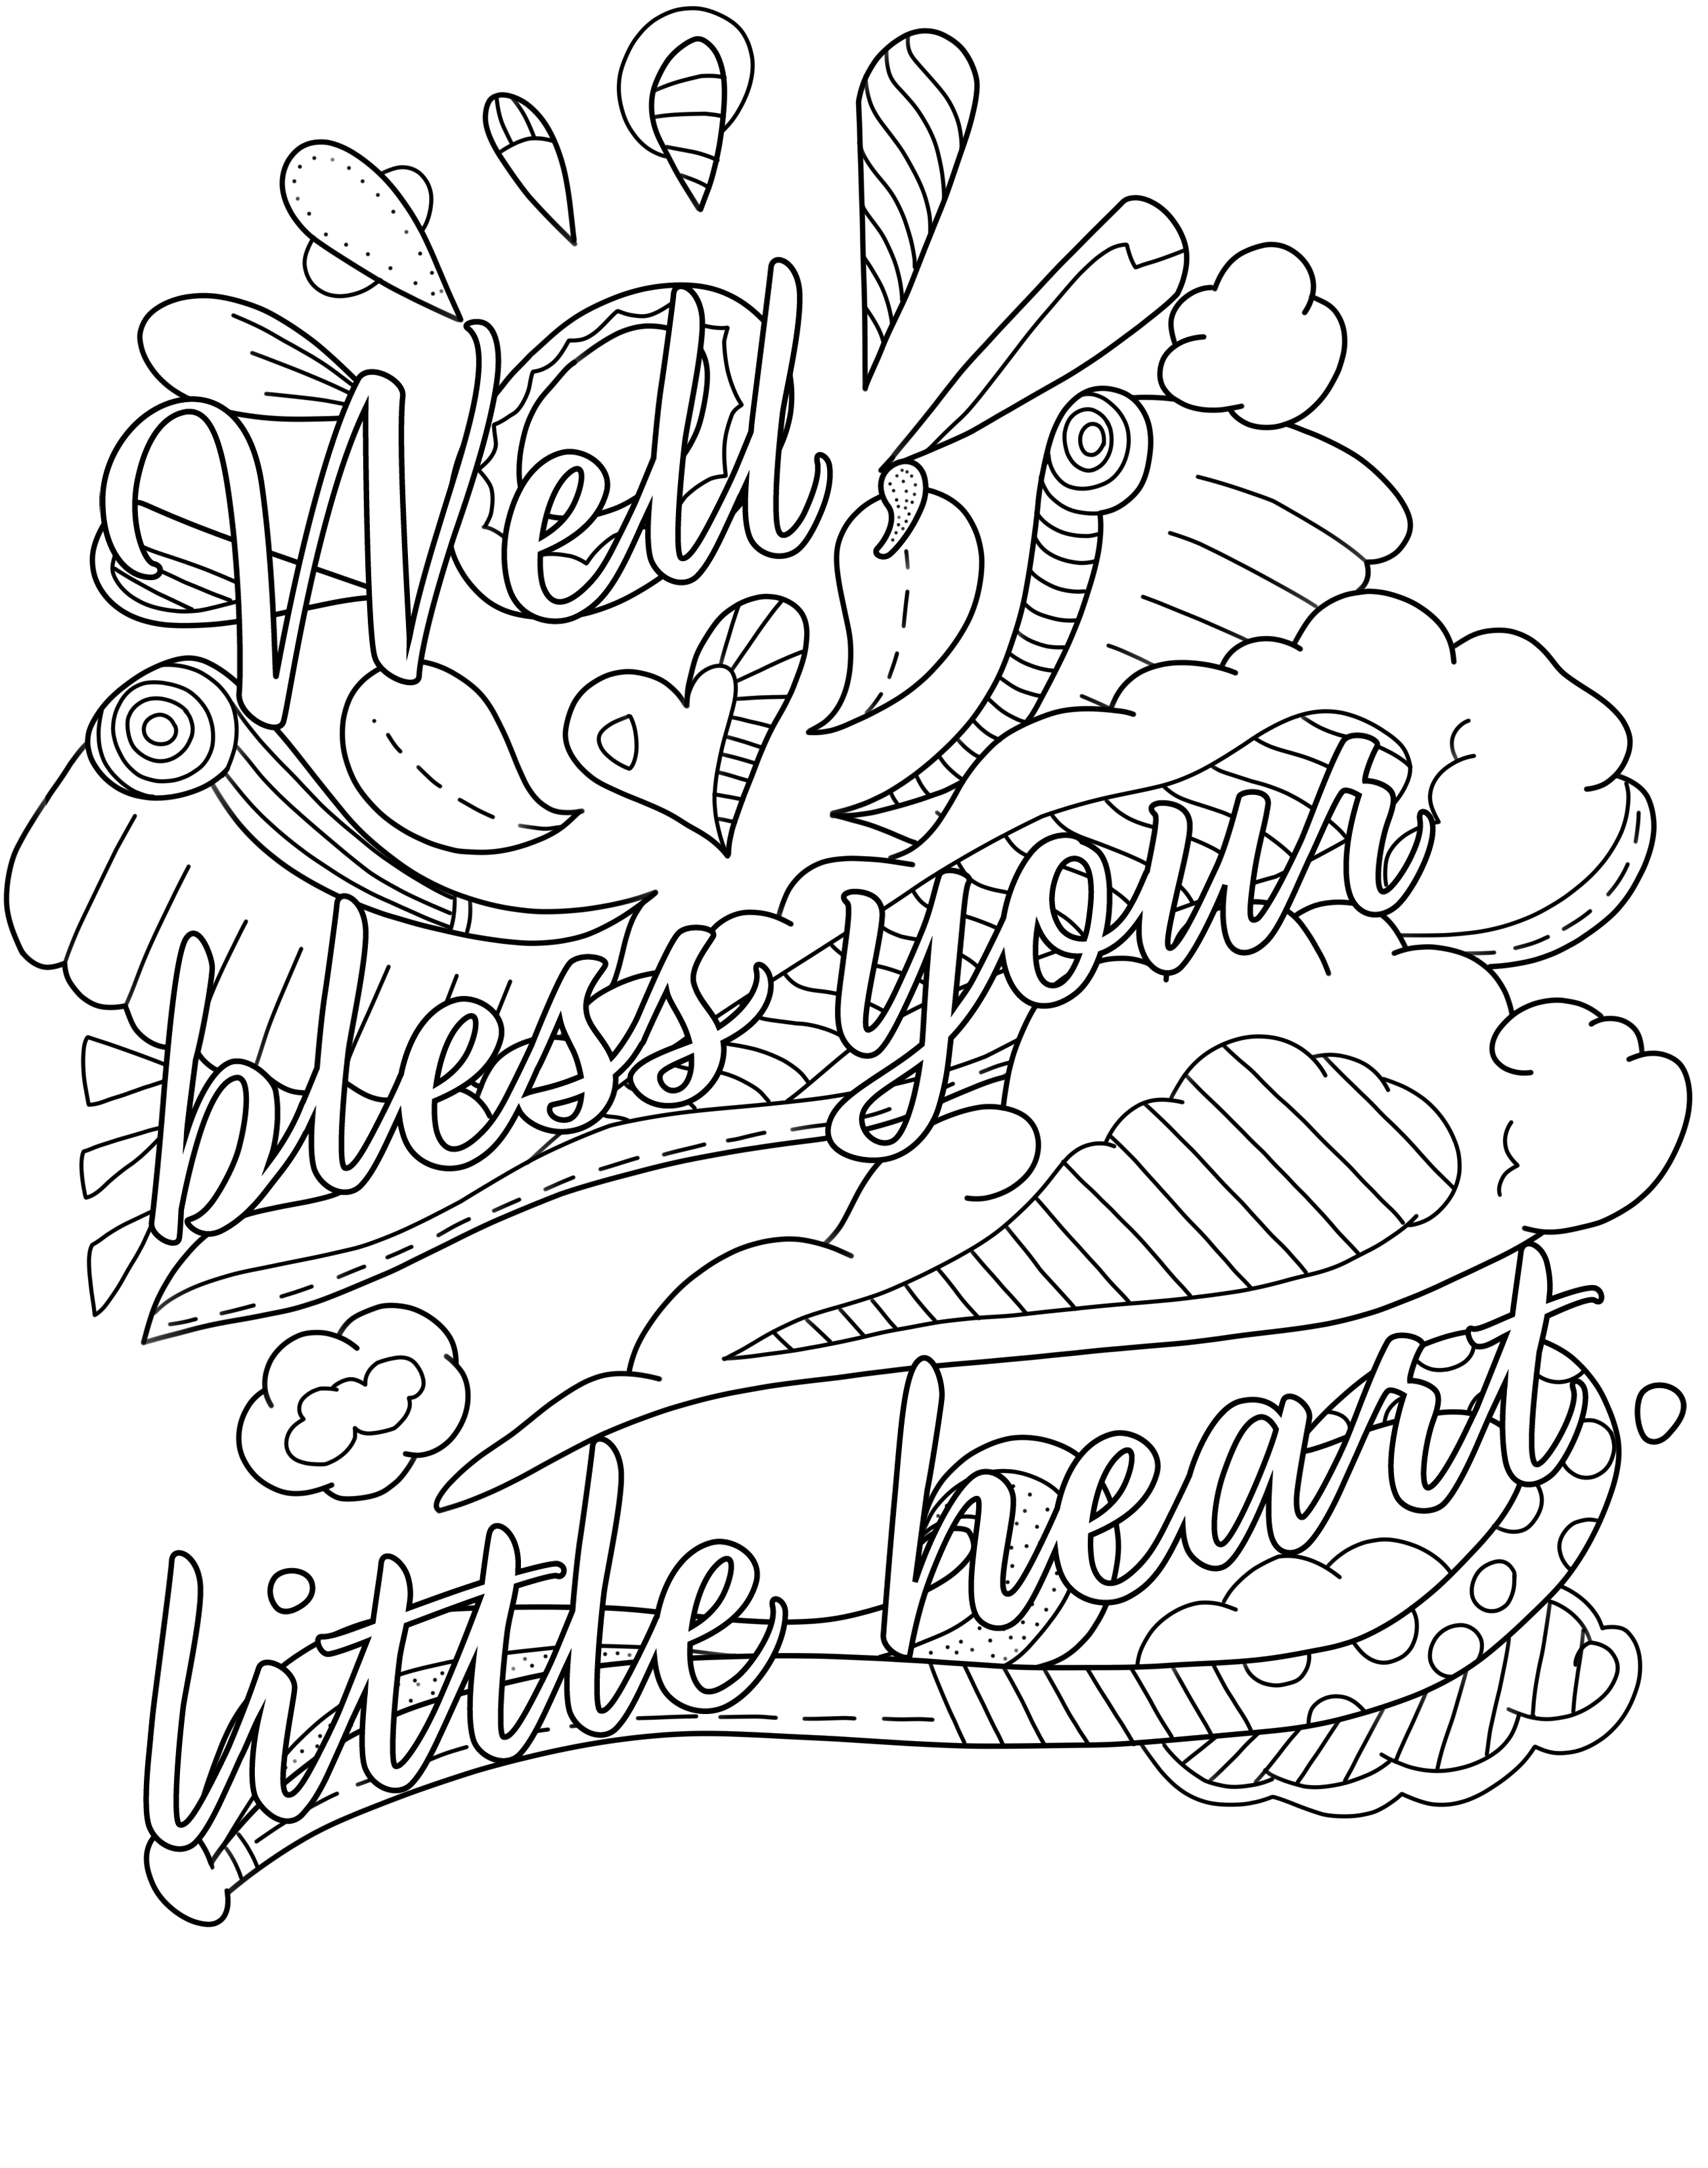 Free Swear Word Printable Page Archives - Thiago Ultra - Free Printable Swear Word Coloring Pages